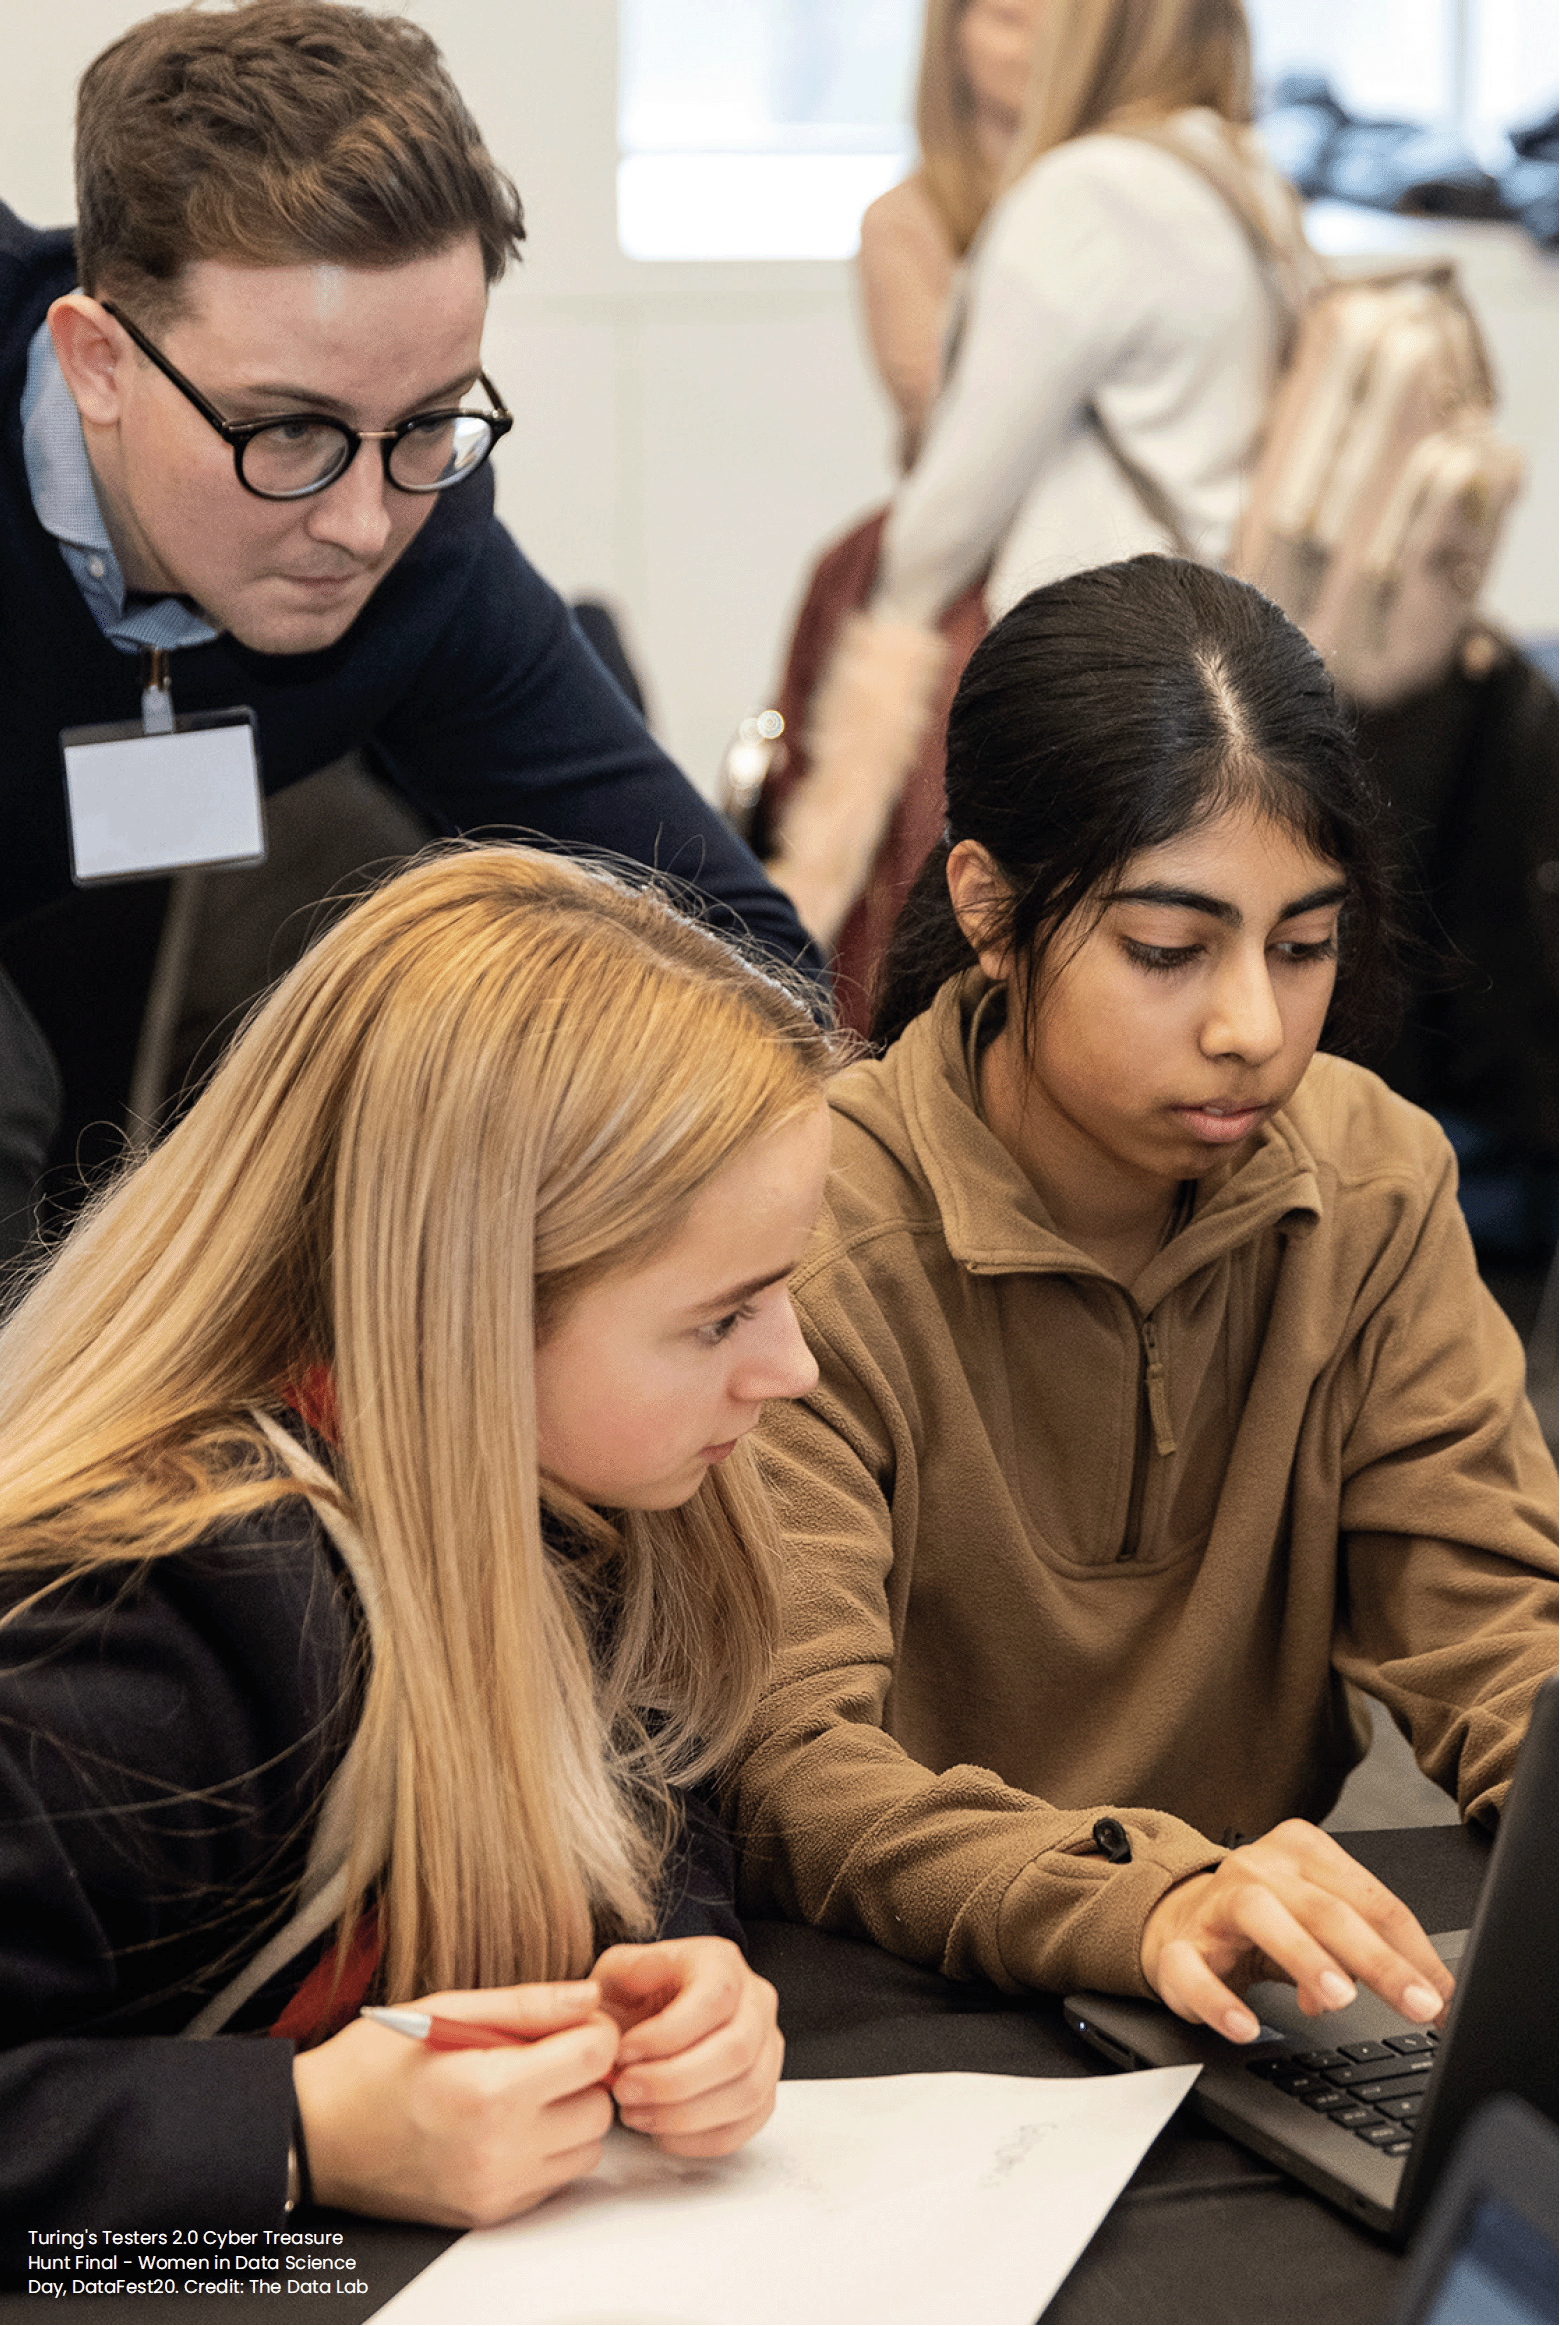 A photo of people taking part in an event on ‘Women in Data Science’ day at DataFest 2020.